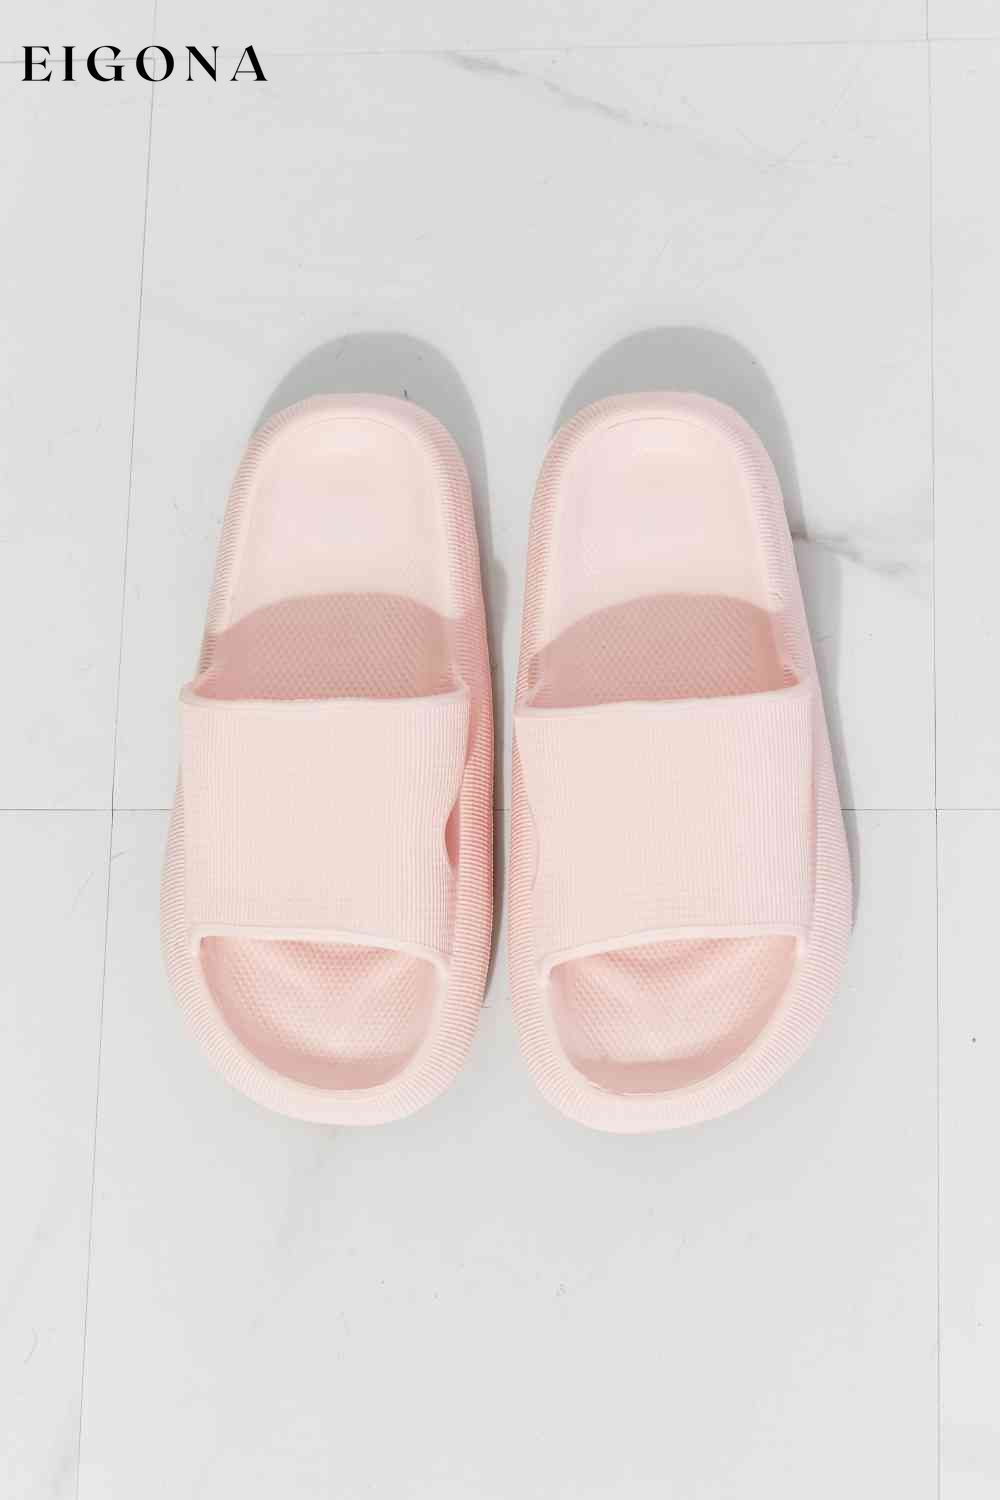 Arms Around Me Open Toe Slide in Pink Melody Ship from USA shoes womens shoes